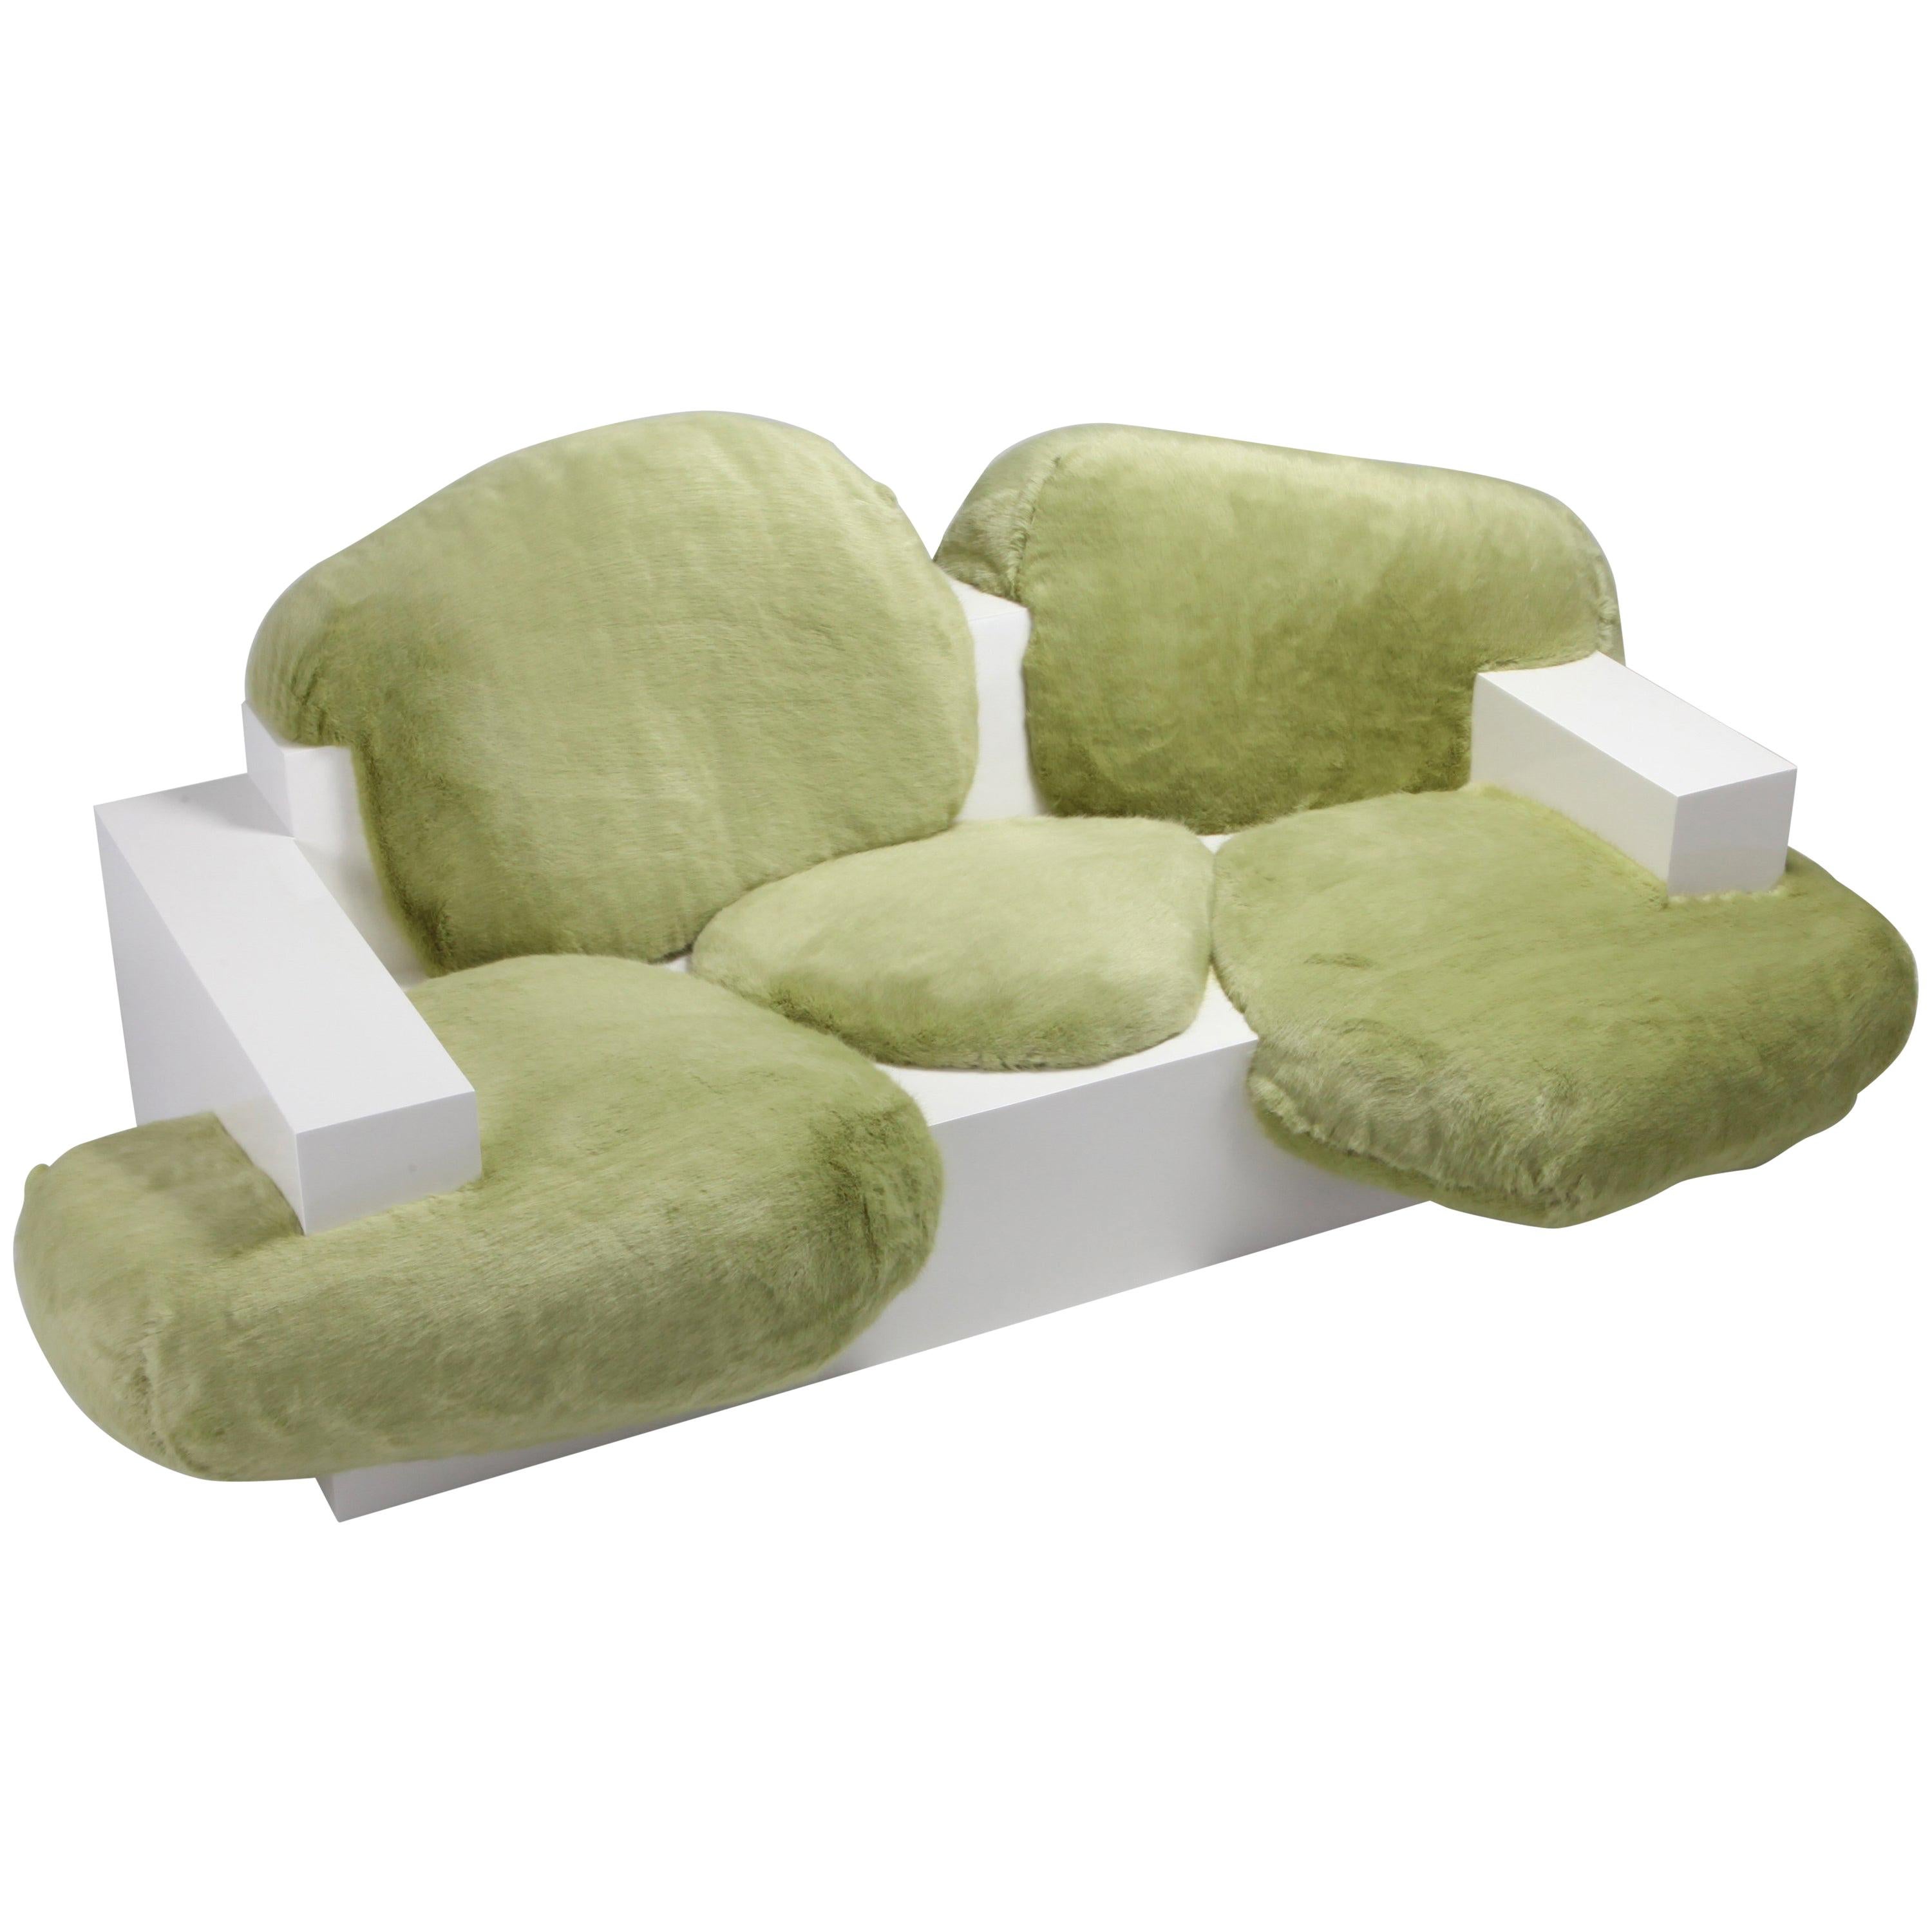 Pillow Couch by Schimmel & Schweikle from the Pillow.pillow Collection